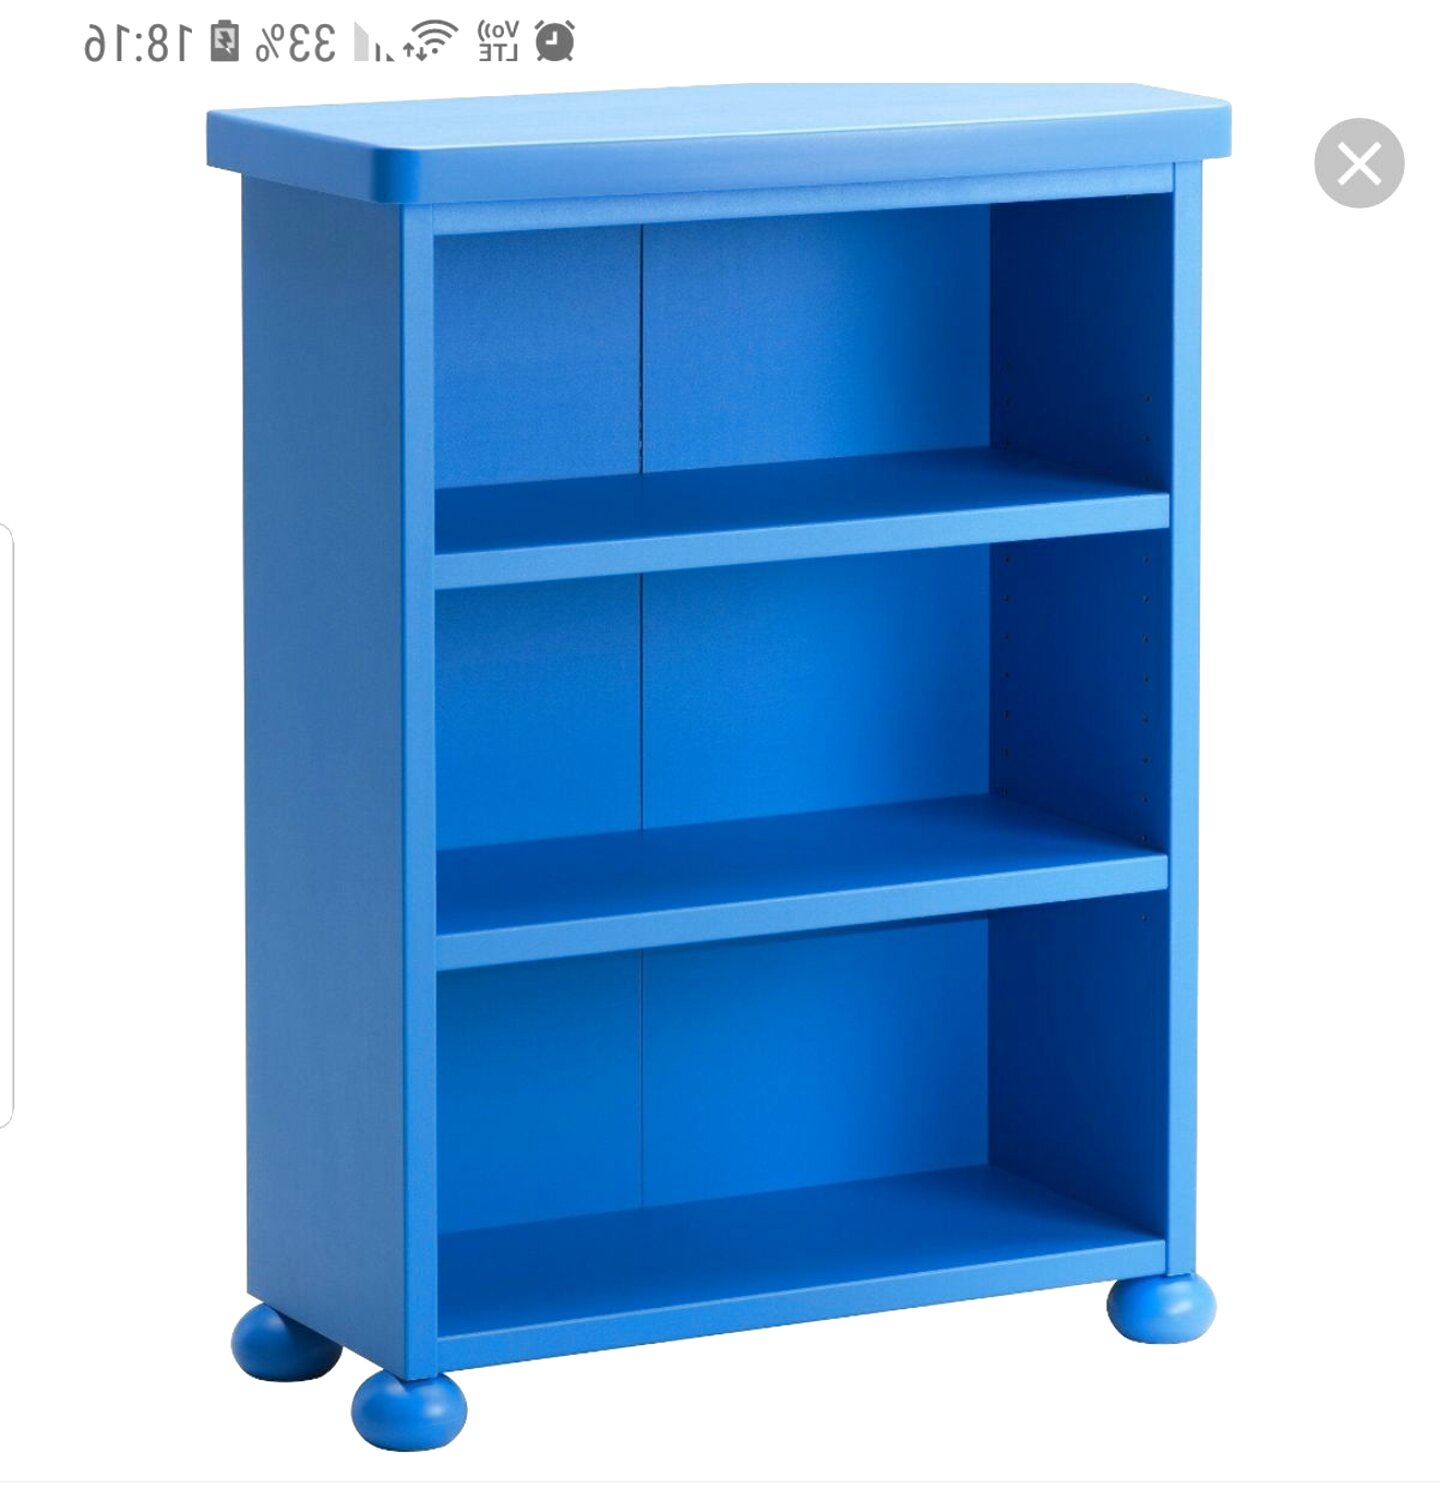 Ikea Mammut Bookcase For Sale In Uk View 30 Bargains